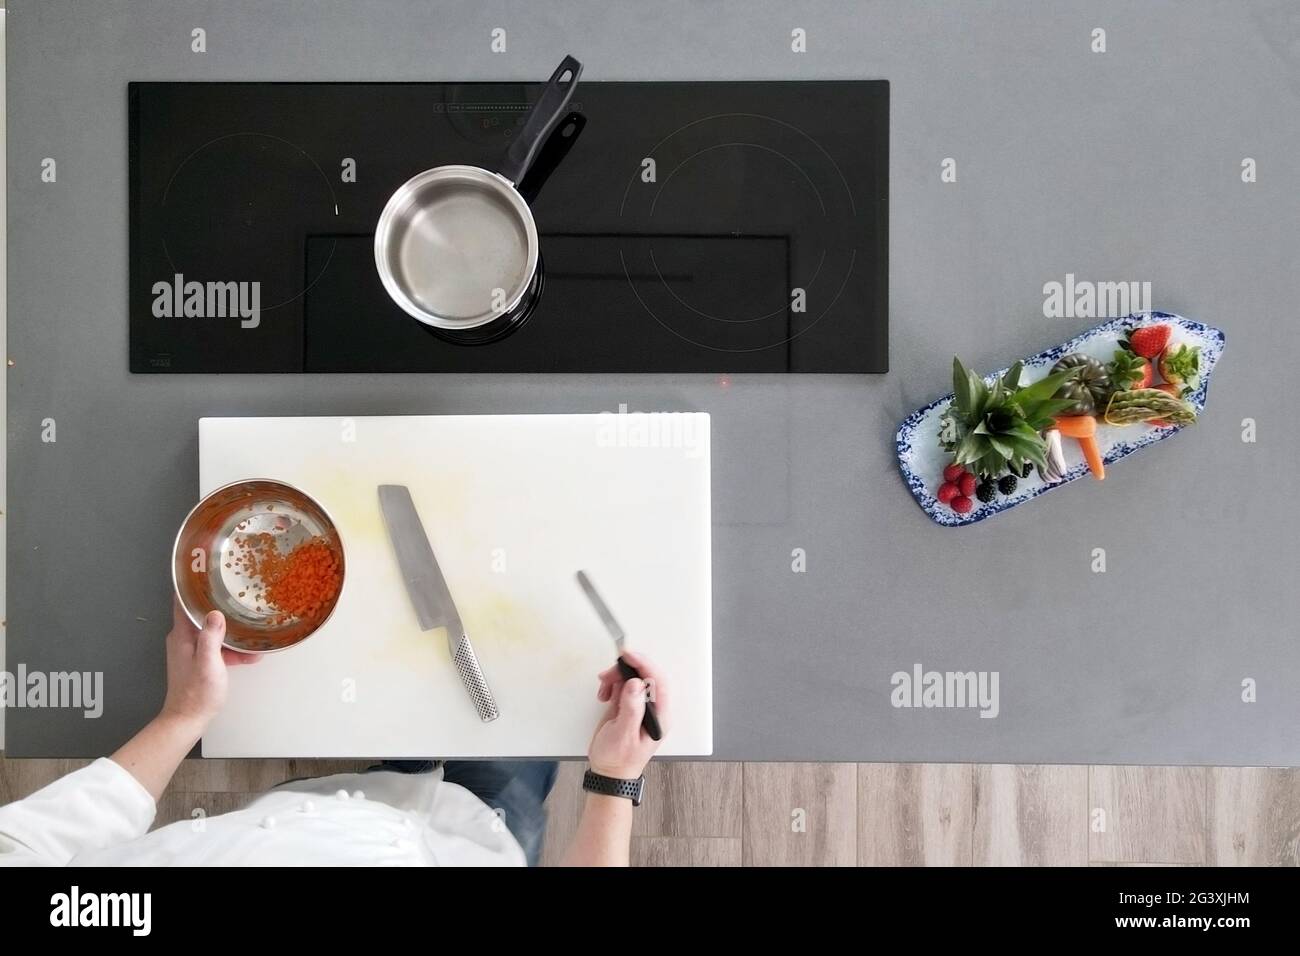 Top view of chef cooking in modern kitchen. Stock Photo